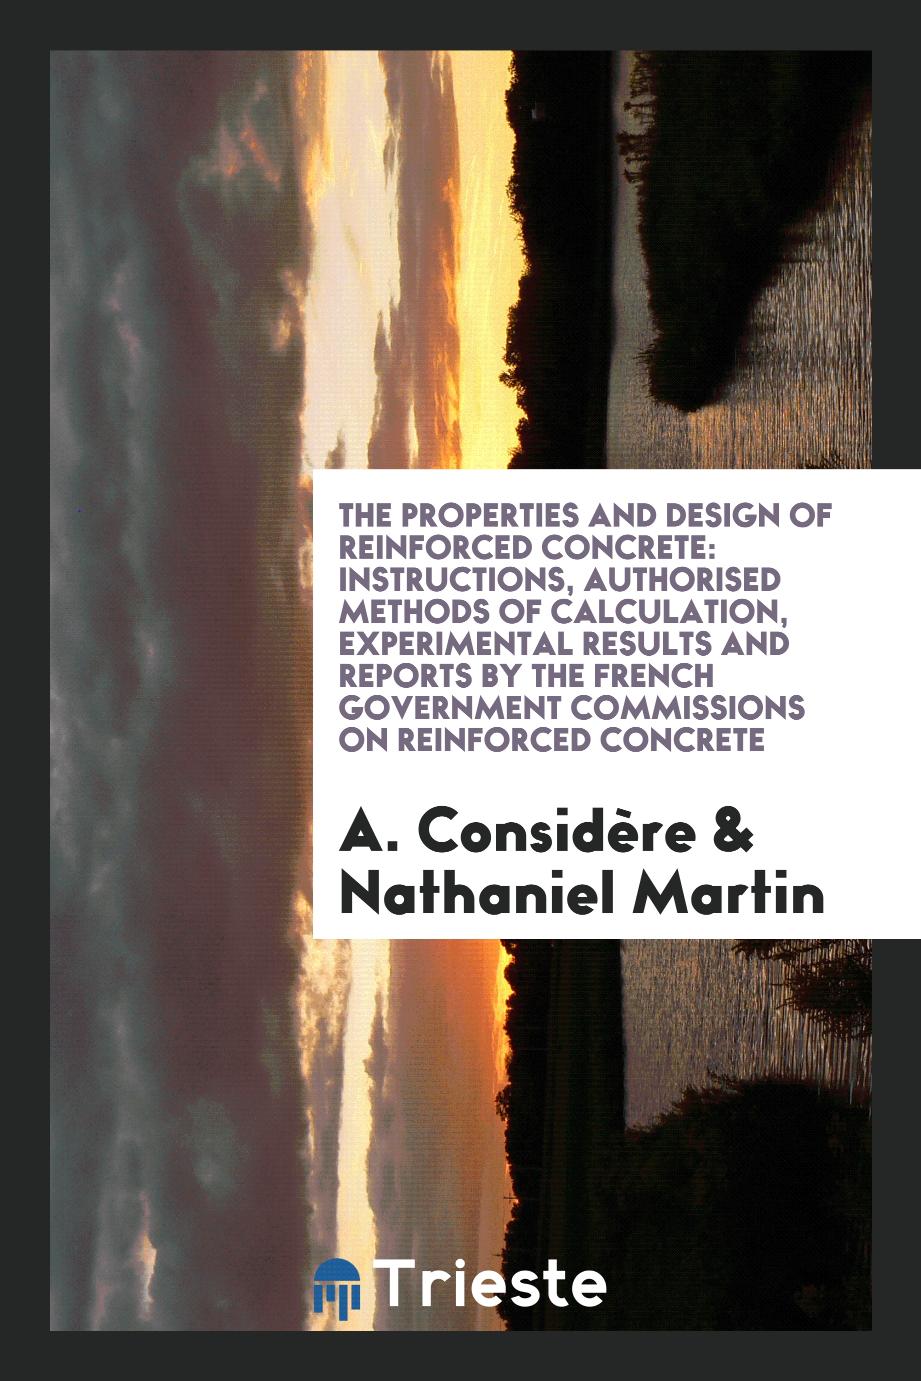 The Properties and Design of Reinforced Concrete: Instructions, Authorised Methods of Calculation, Experimental Results and Reports by the French Government Commissions on Reinforced Concrete